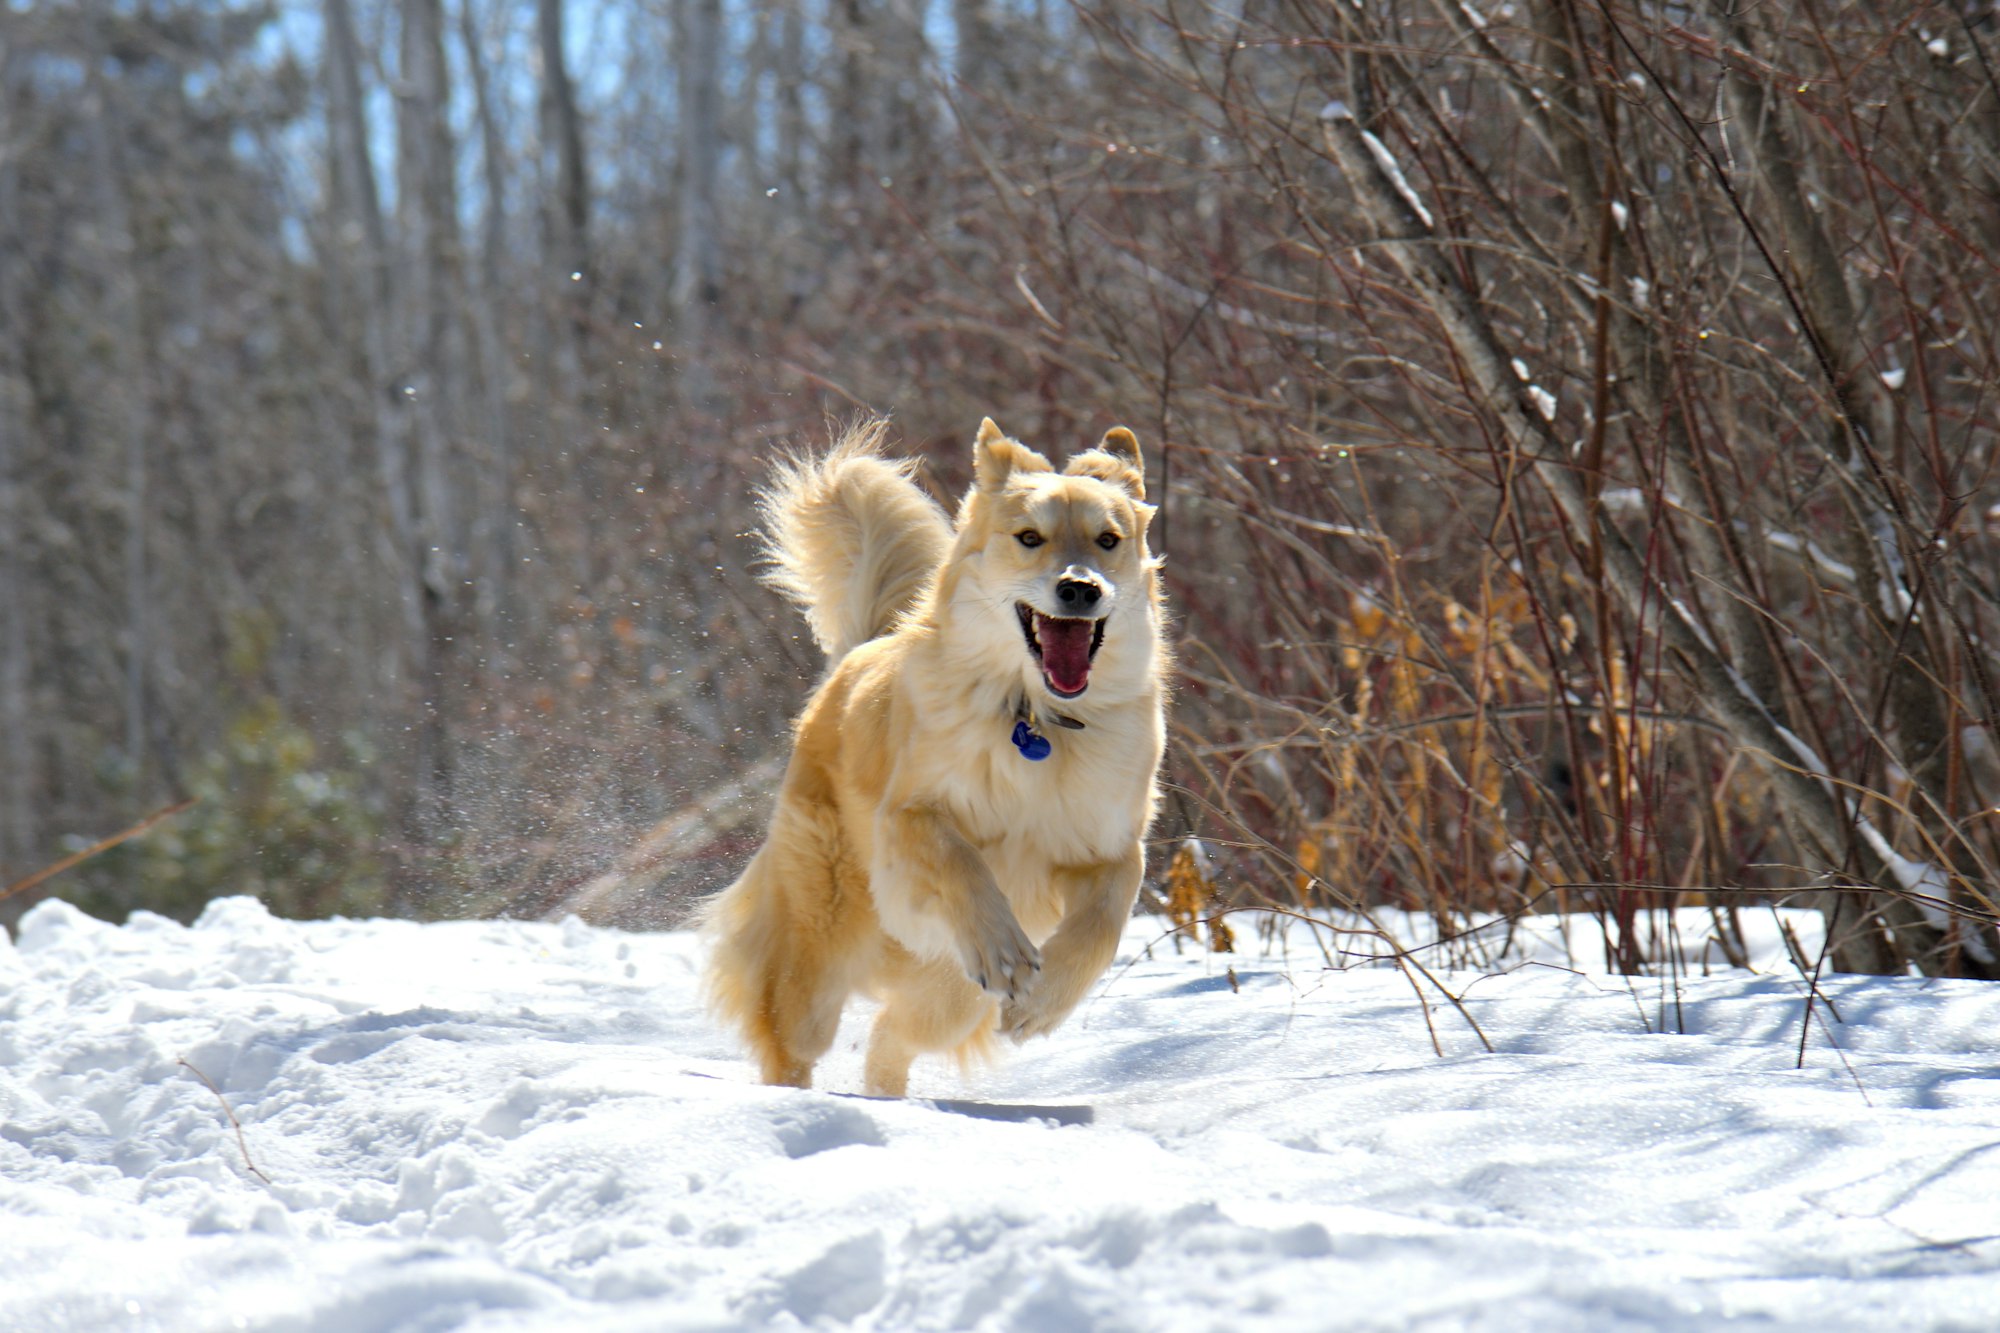 brown and white long coated dog running on snow covered ground during daytime